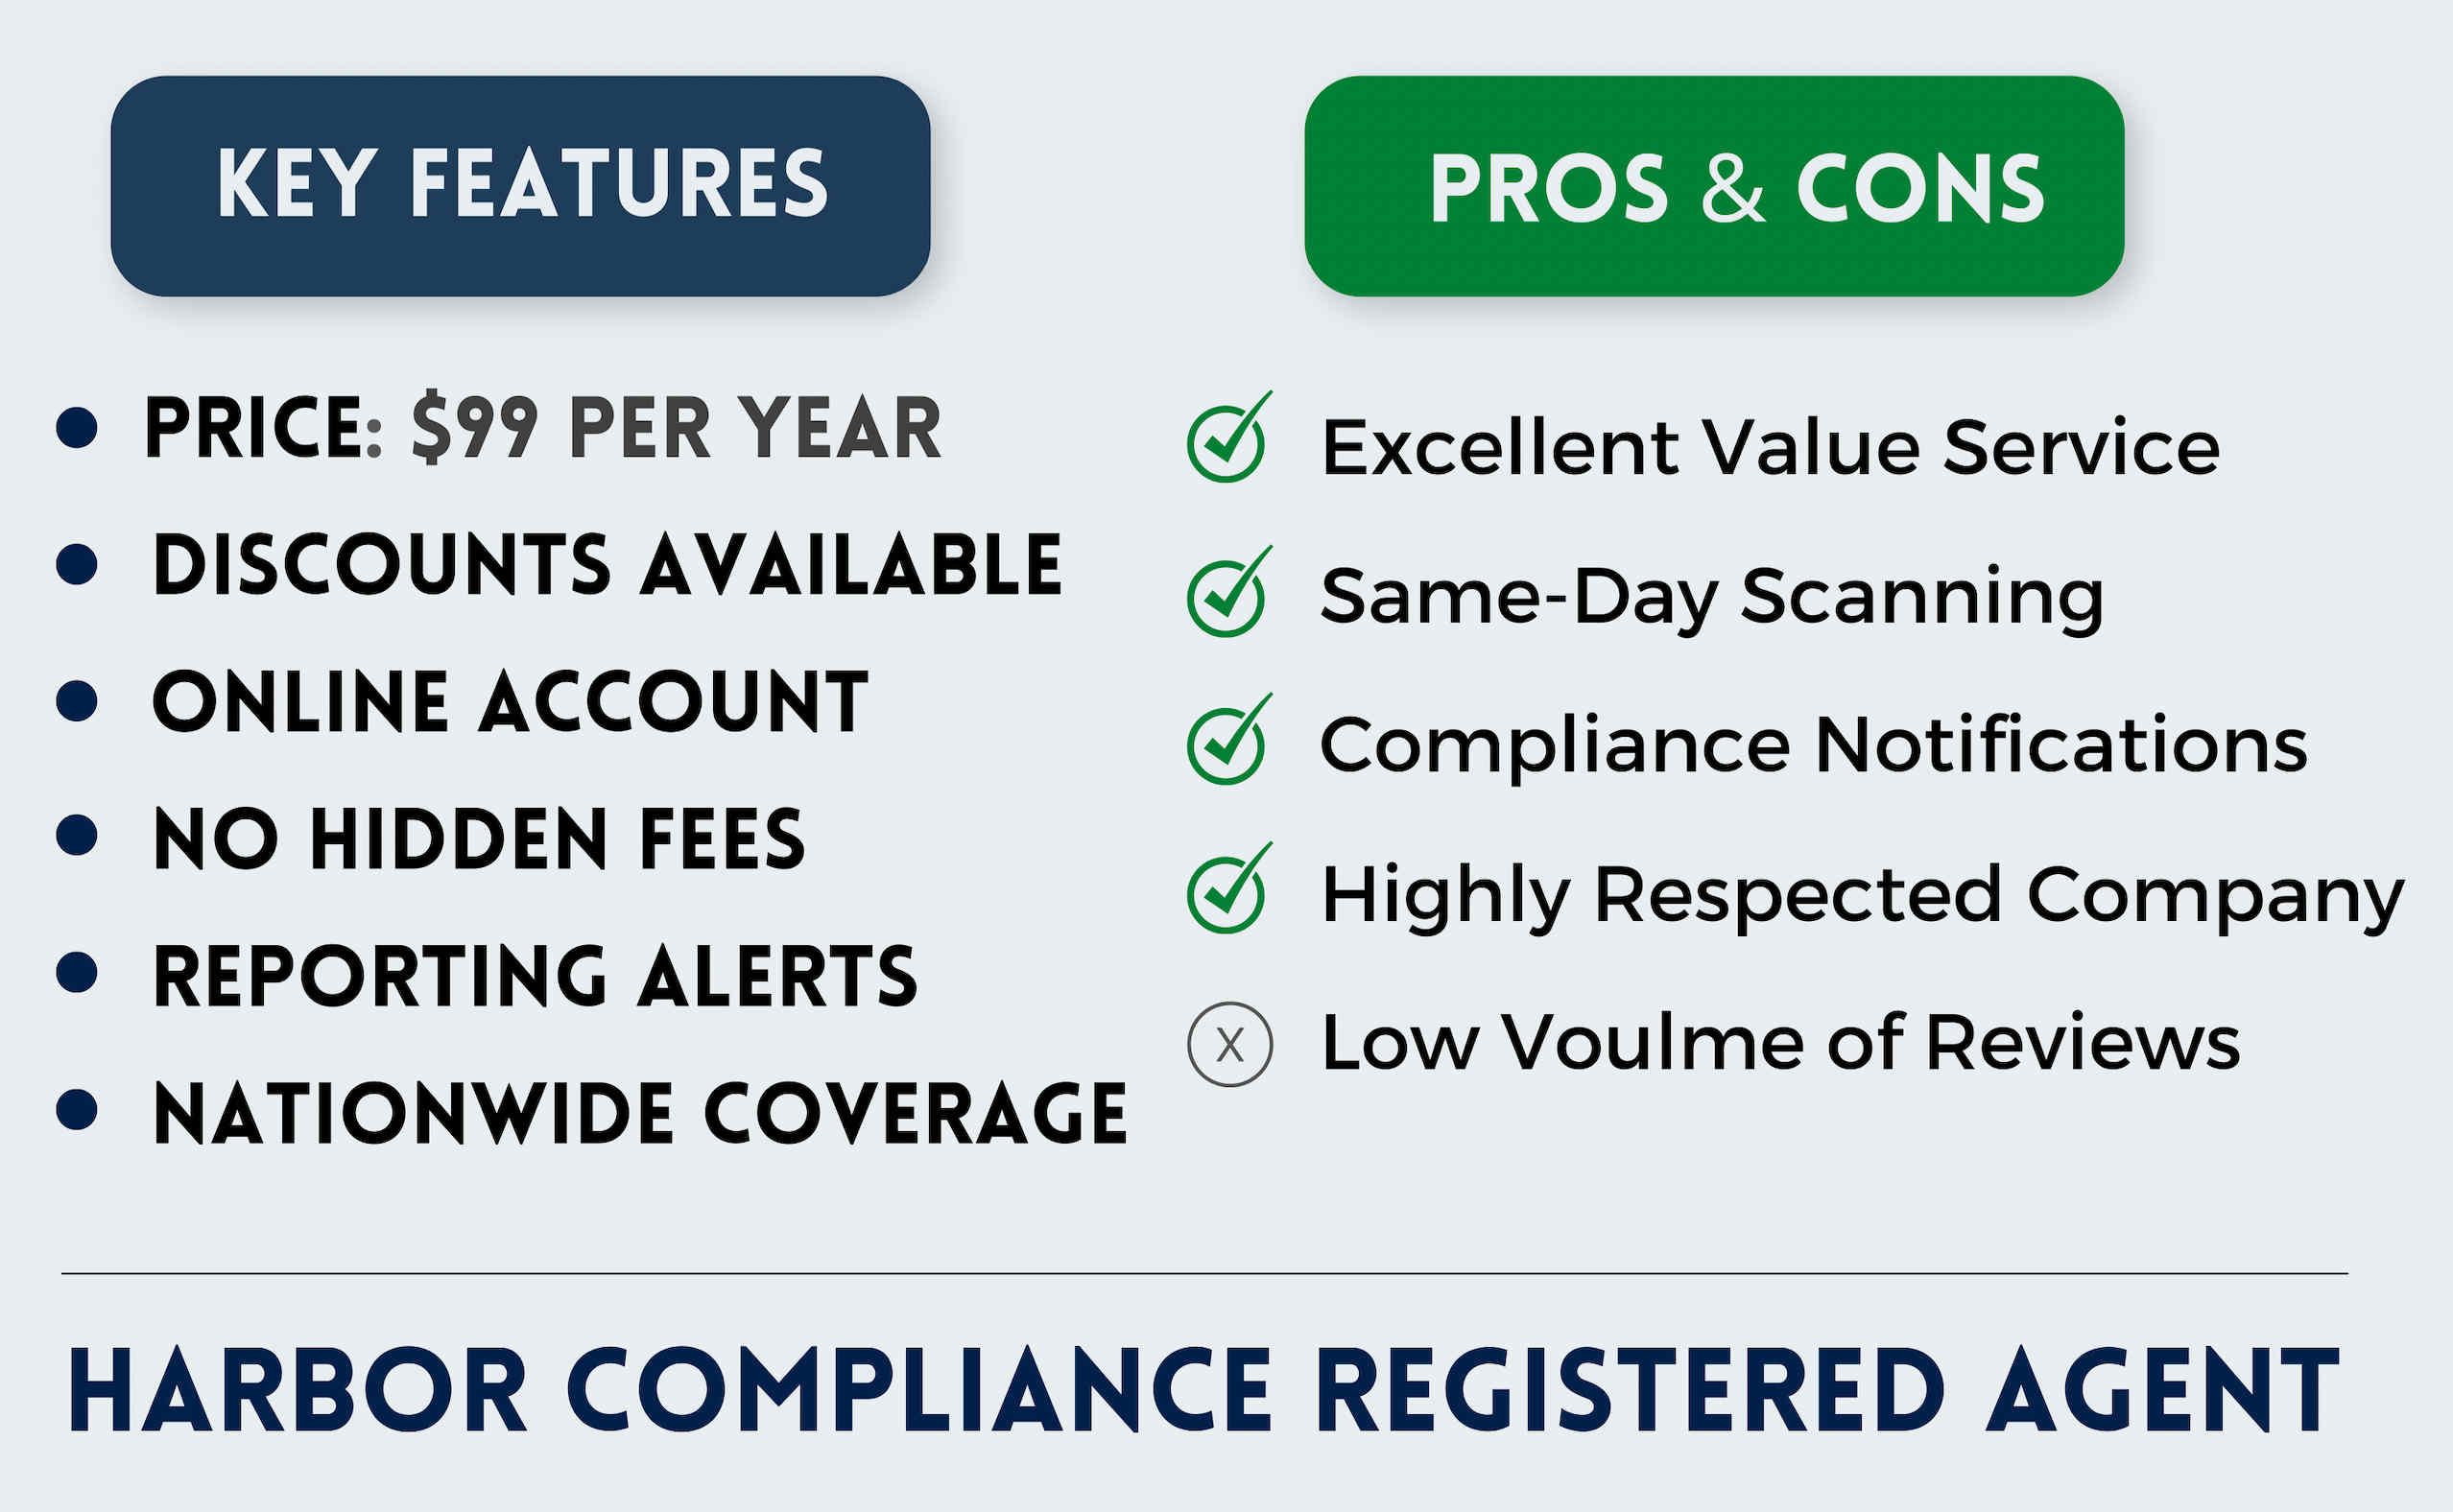 harbor compliance registered agent services pros cons